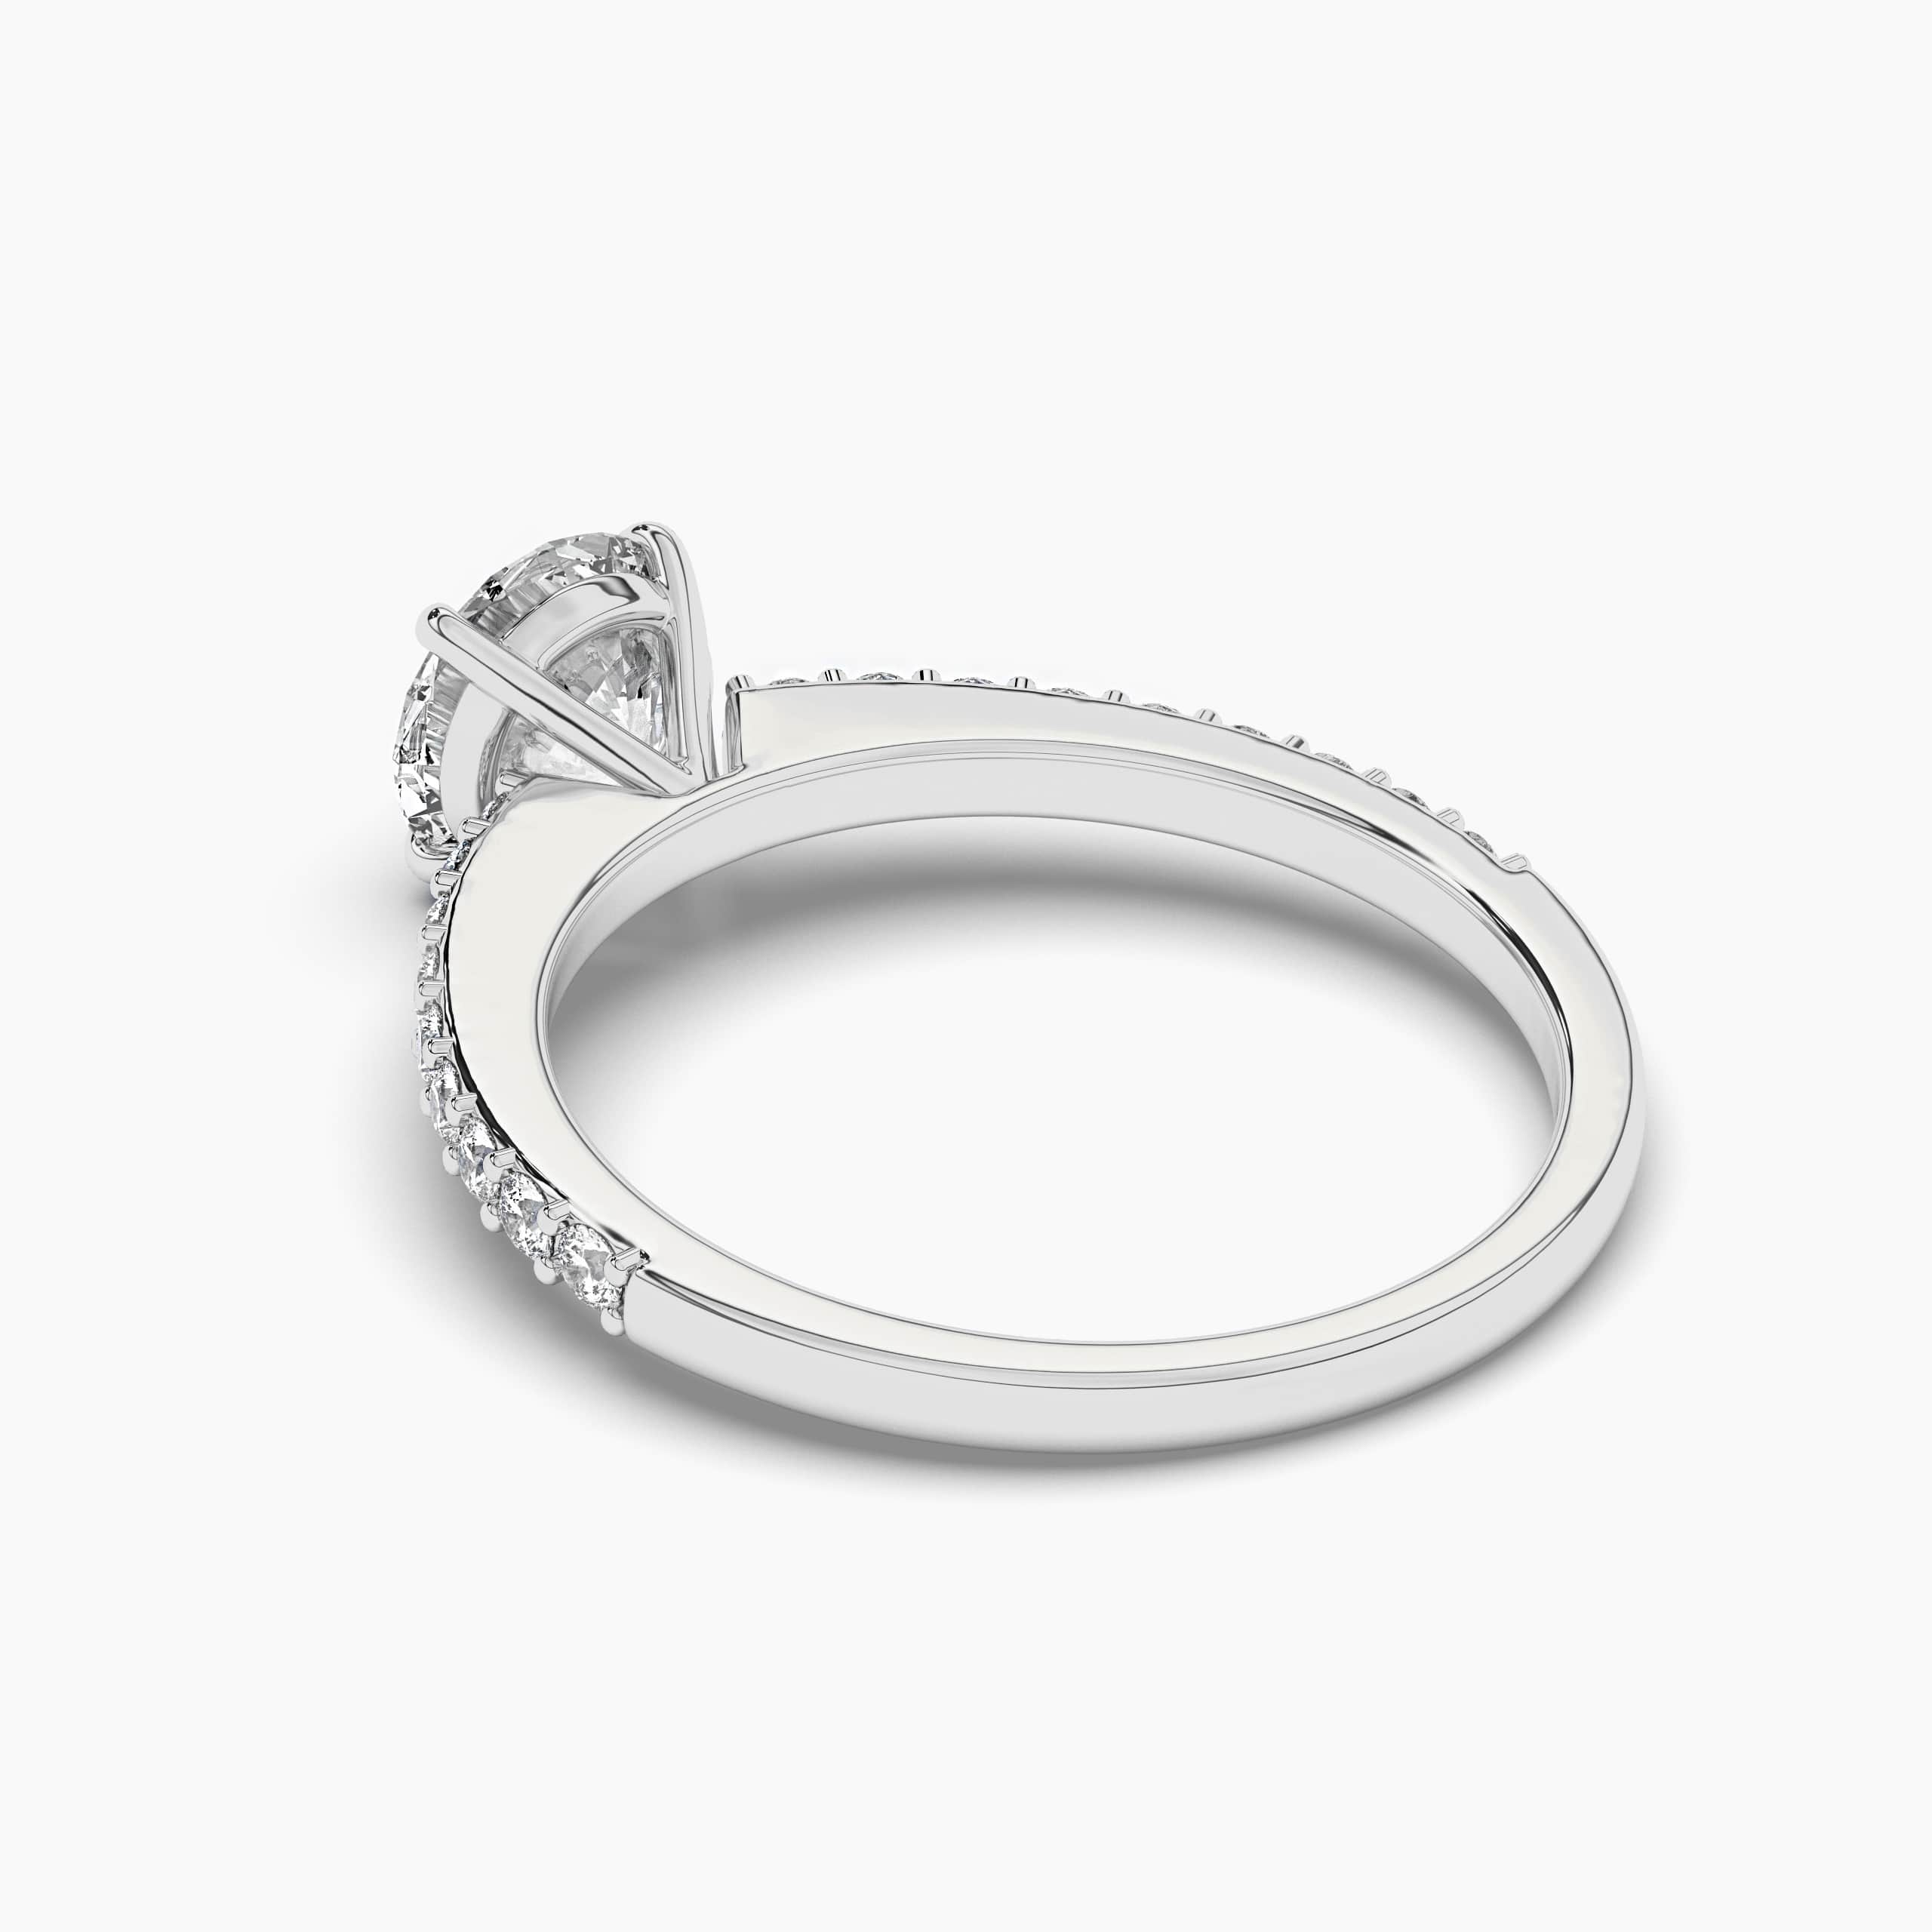 Round Lab Grown Diamond solitaire engagement ring with Pave Diamonds